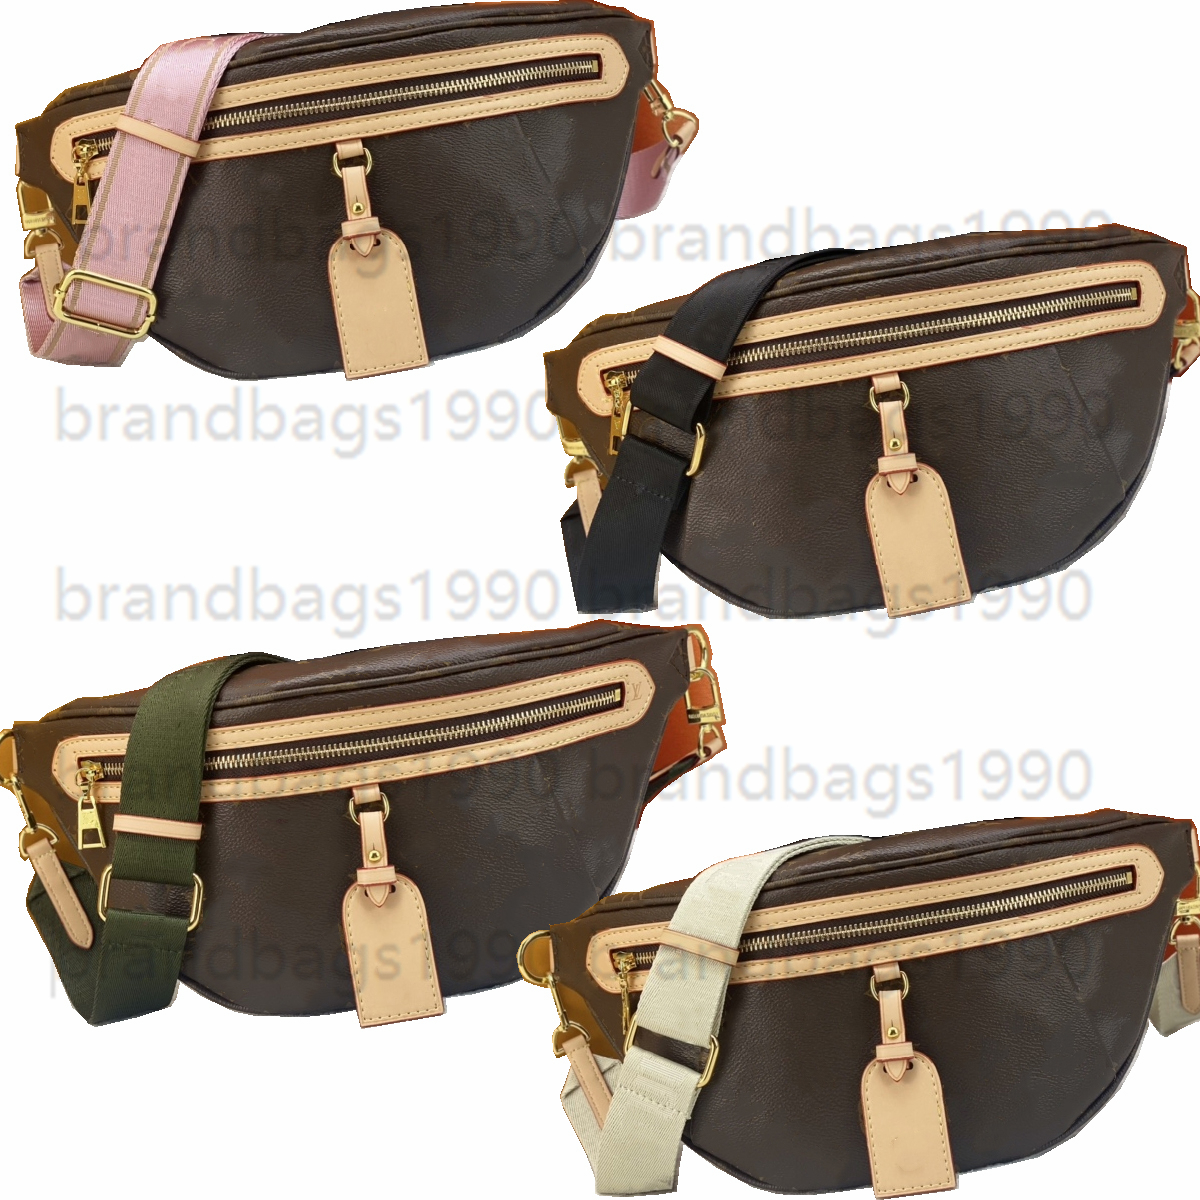 Bumbag Cross Body Waist Bags Temperament Bumbags Fanny Pack Bum embossing flowers Famous soft leather Luxurys designers bags Serial Number Date Code DustBag